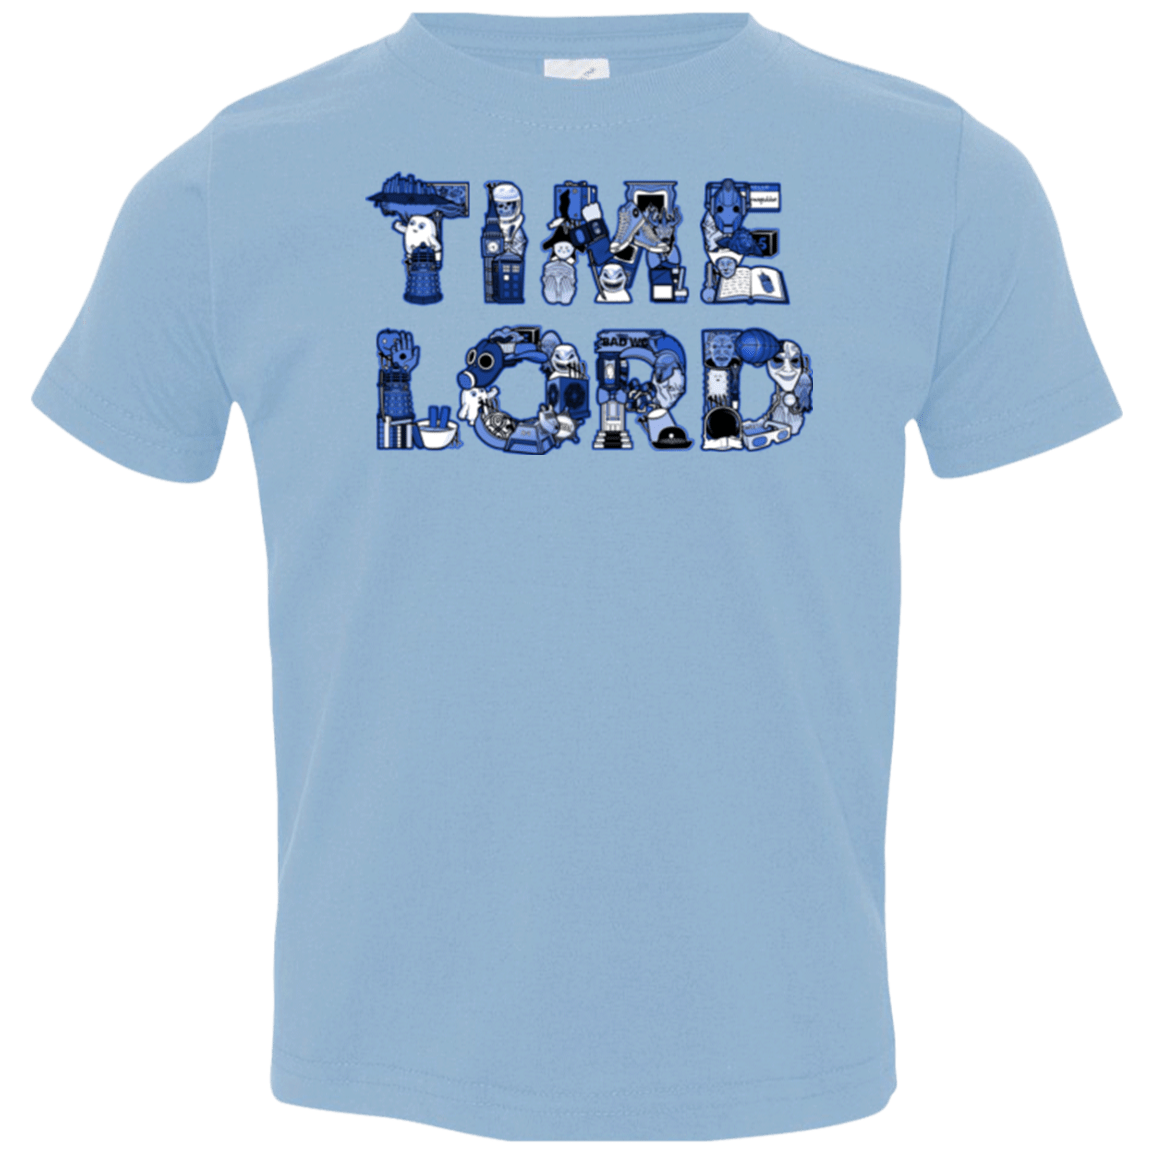 T-Shirts Light Blue / 2T Timelord Toddler Premium T-Shirt